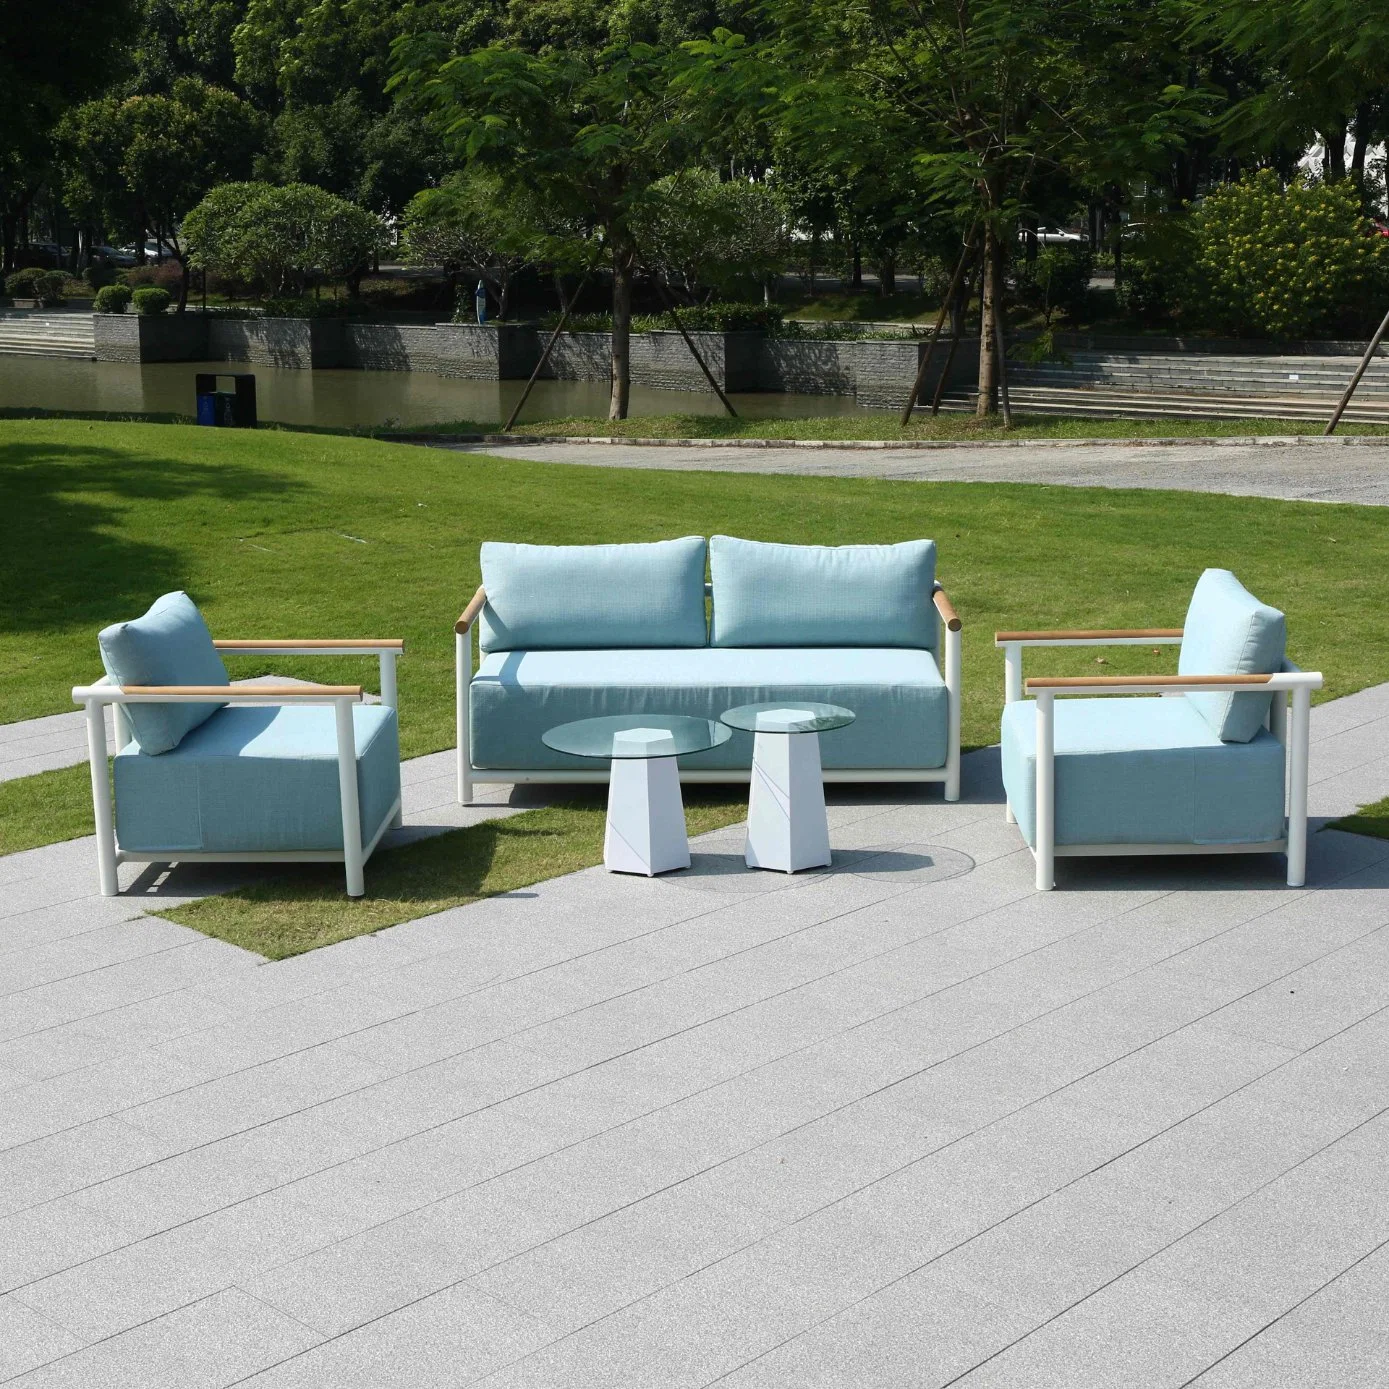 2+1+1 Aluminum Frame Outdoor Garden Patio Swimming Pool Side Sofa Set Garden Furniture with 2 Coffee Table